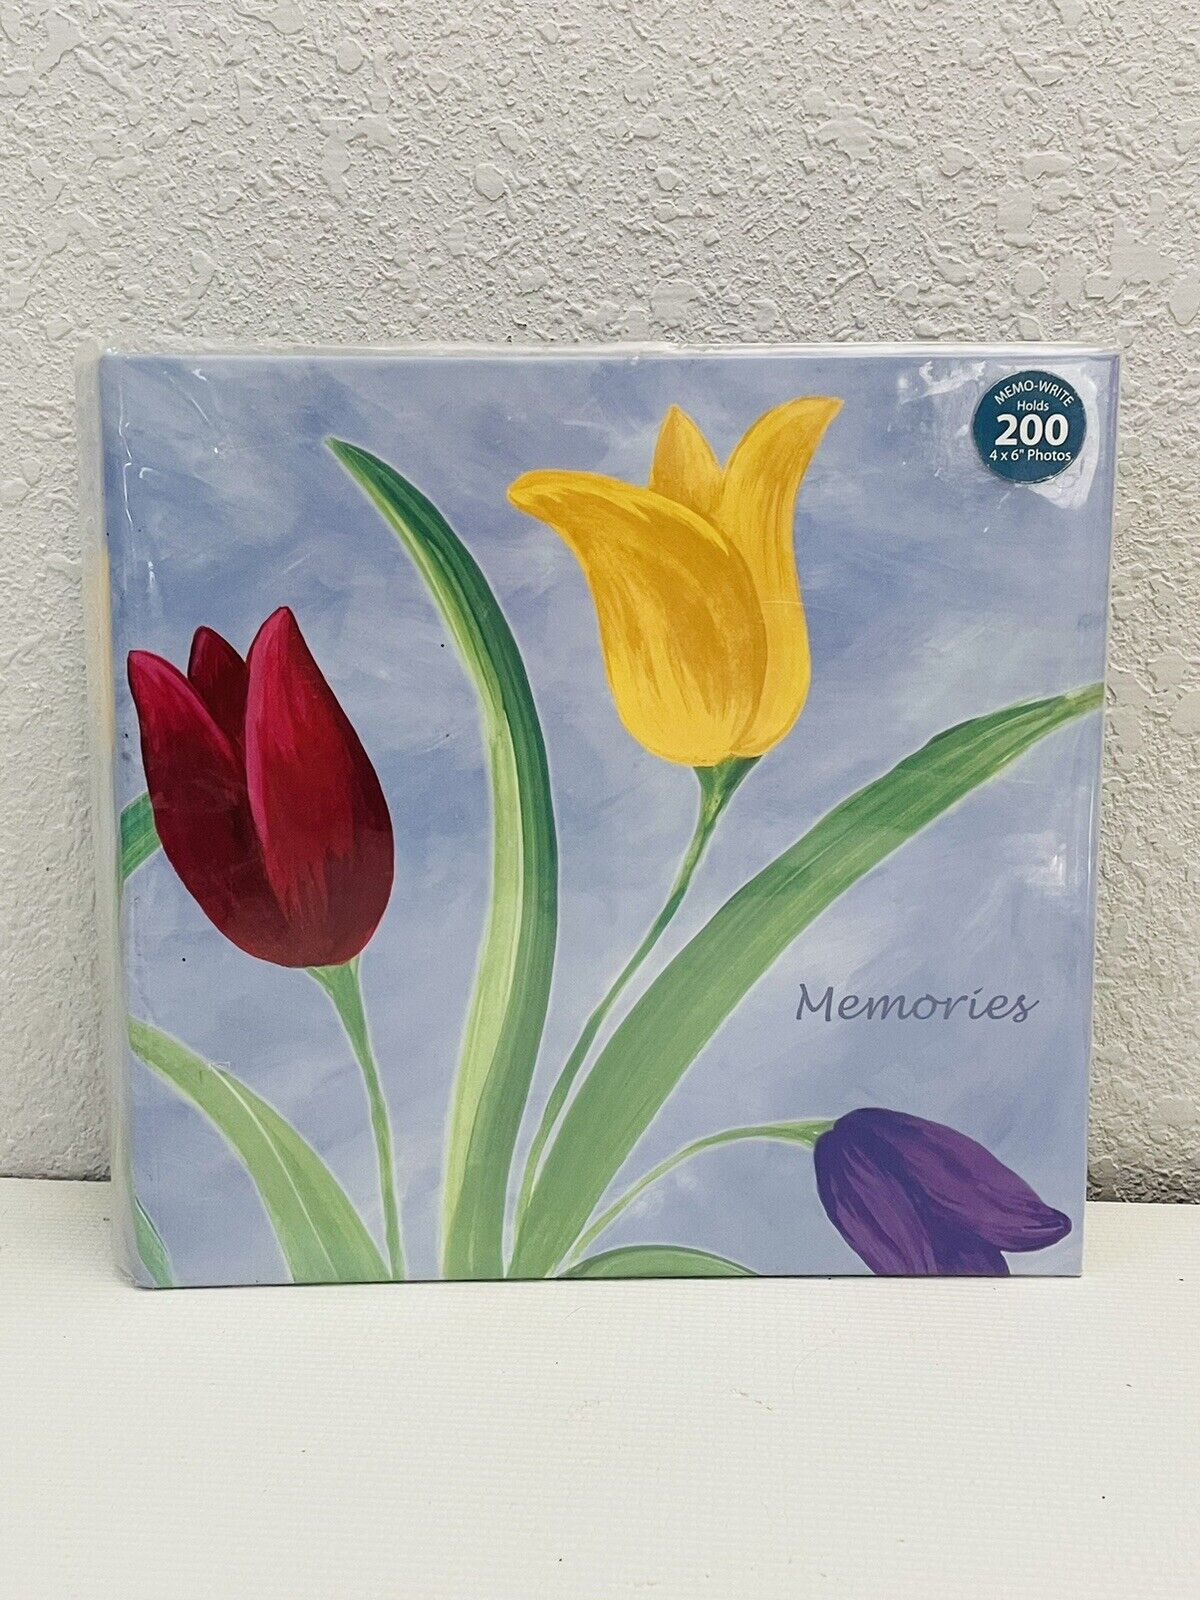 Floral Memories Photo Album - Holds 200 Pictures - Brand New